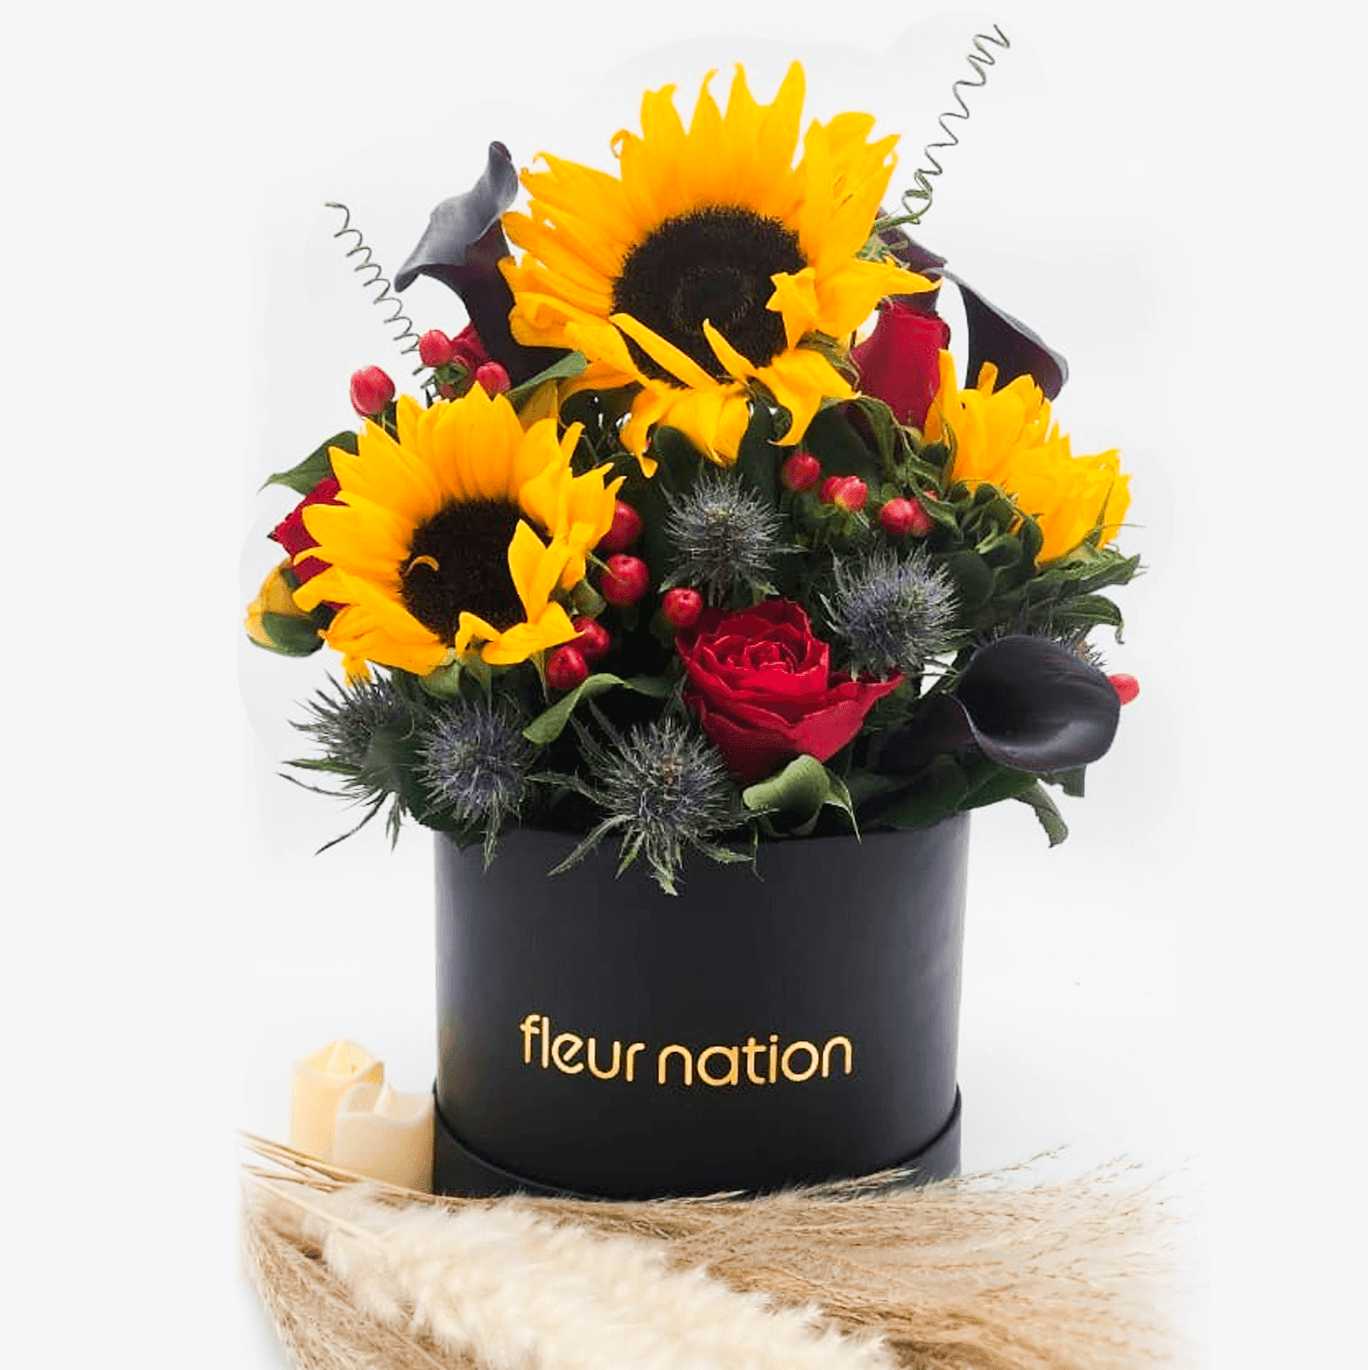 Spring Fest - Fleur Nation - flowers, chocolates, cakes and gifts same day delivery in Dubai